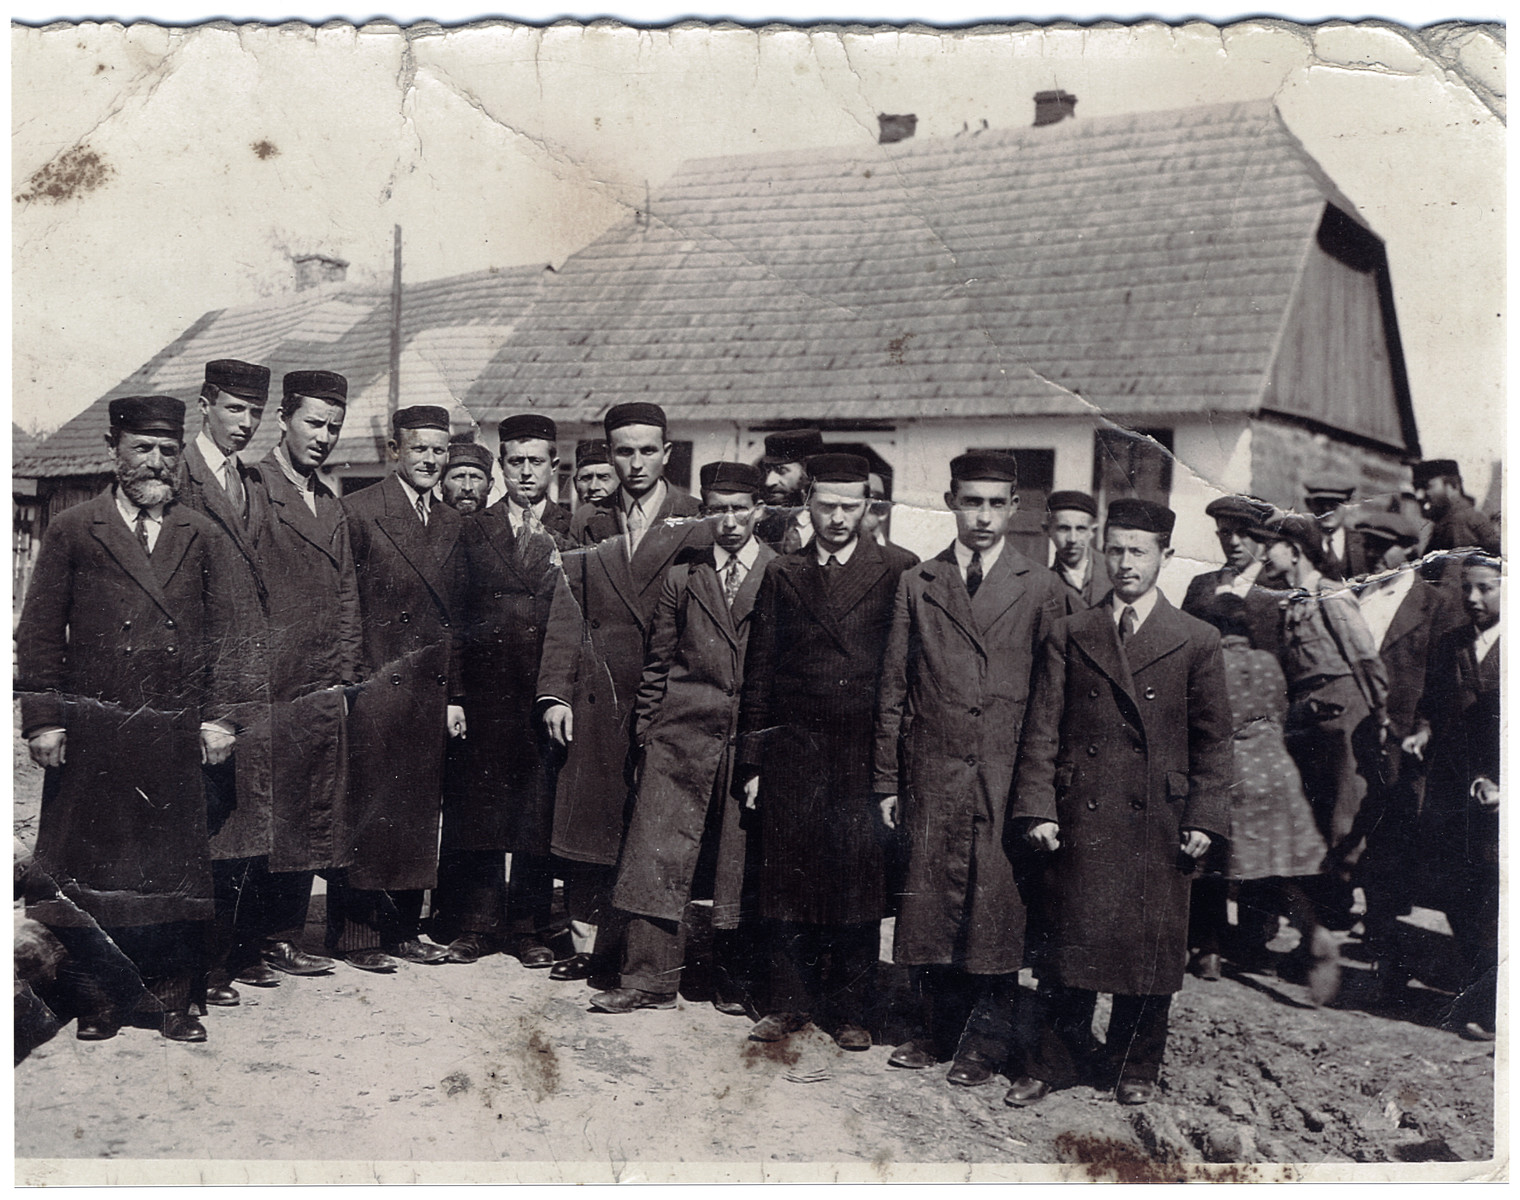 Group photograph of Chassidic Jews in the town of Wachok, Poland.  

Among those pictured are Mendel Lustman (far right) and his brother Pinchas Lustman (fourth from the right).  On the far left is Chaim Binstok.